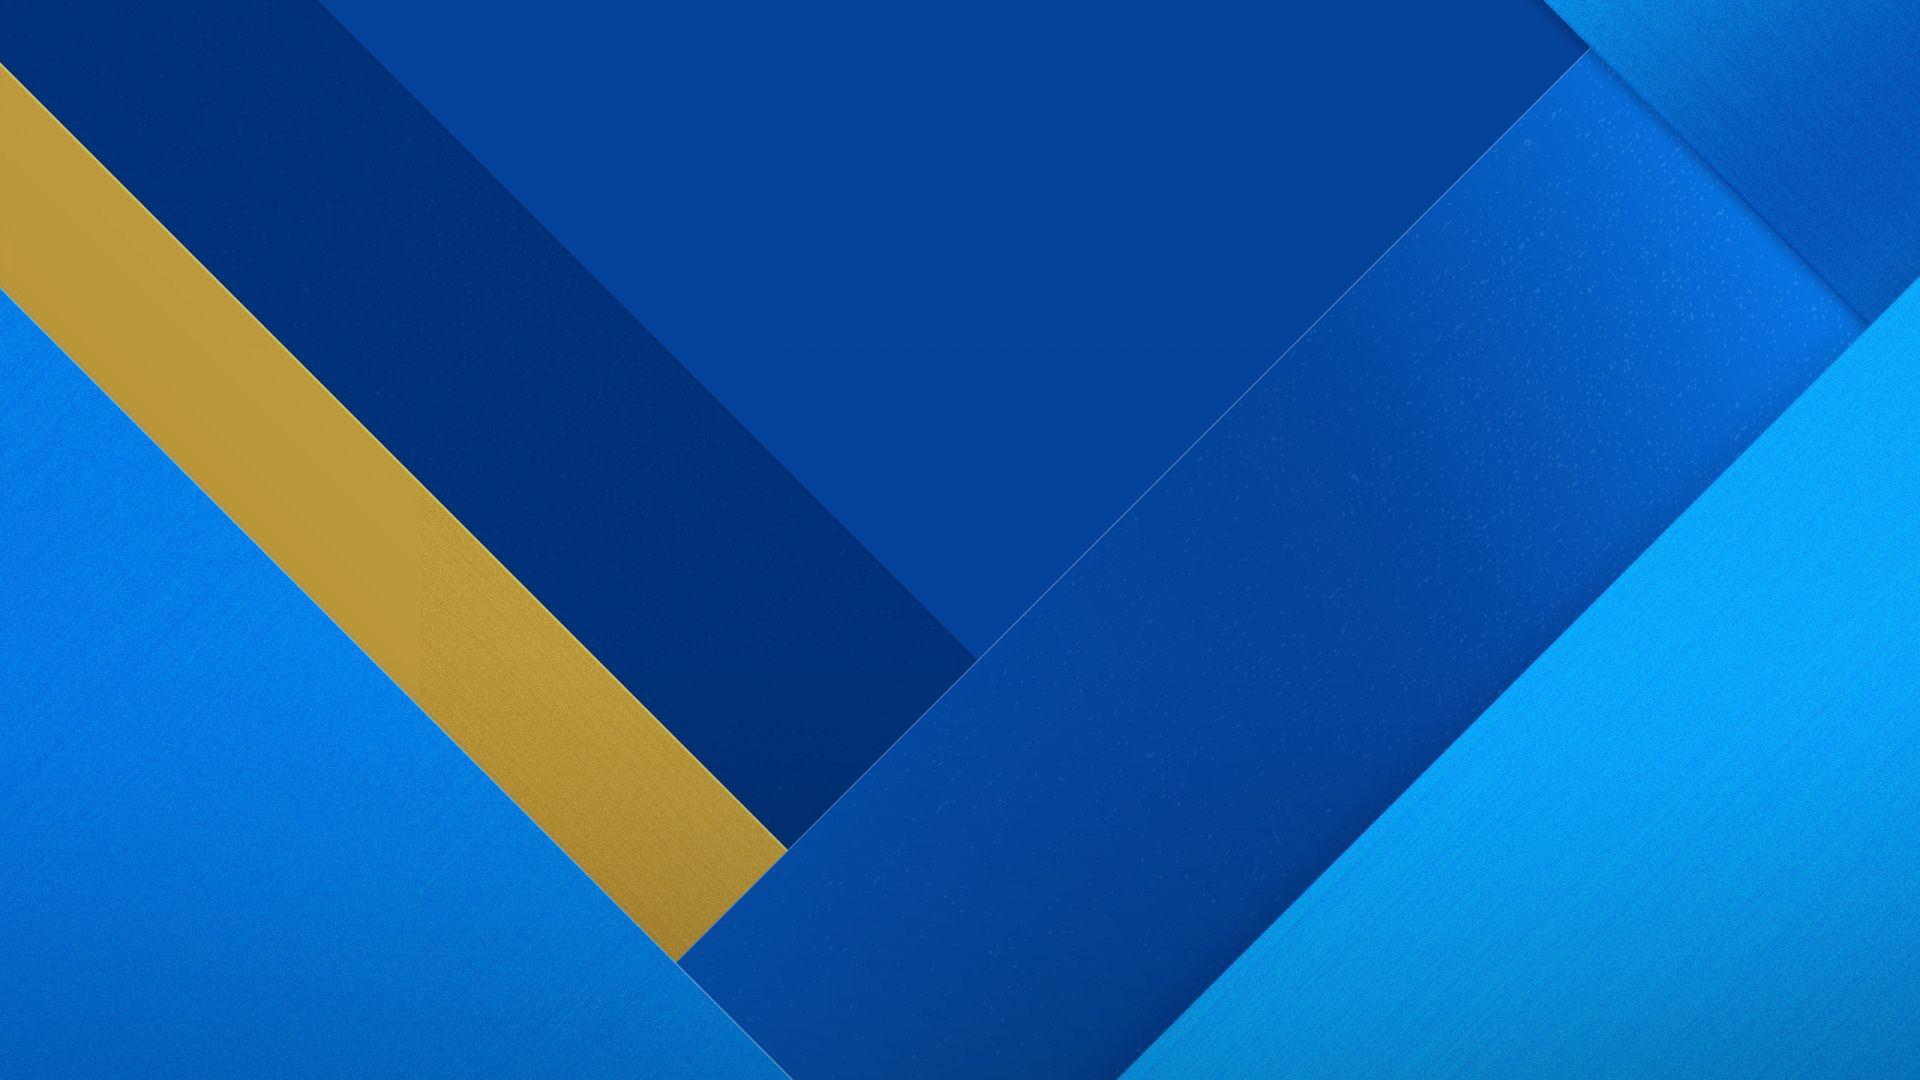 Geometric, Material Design, Stock Blue, Abstract, Wallpaper